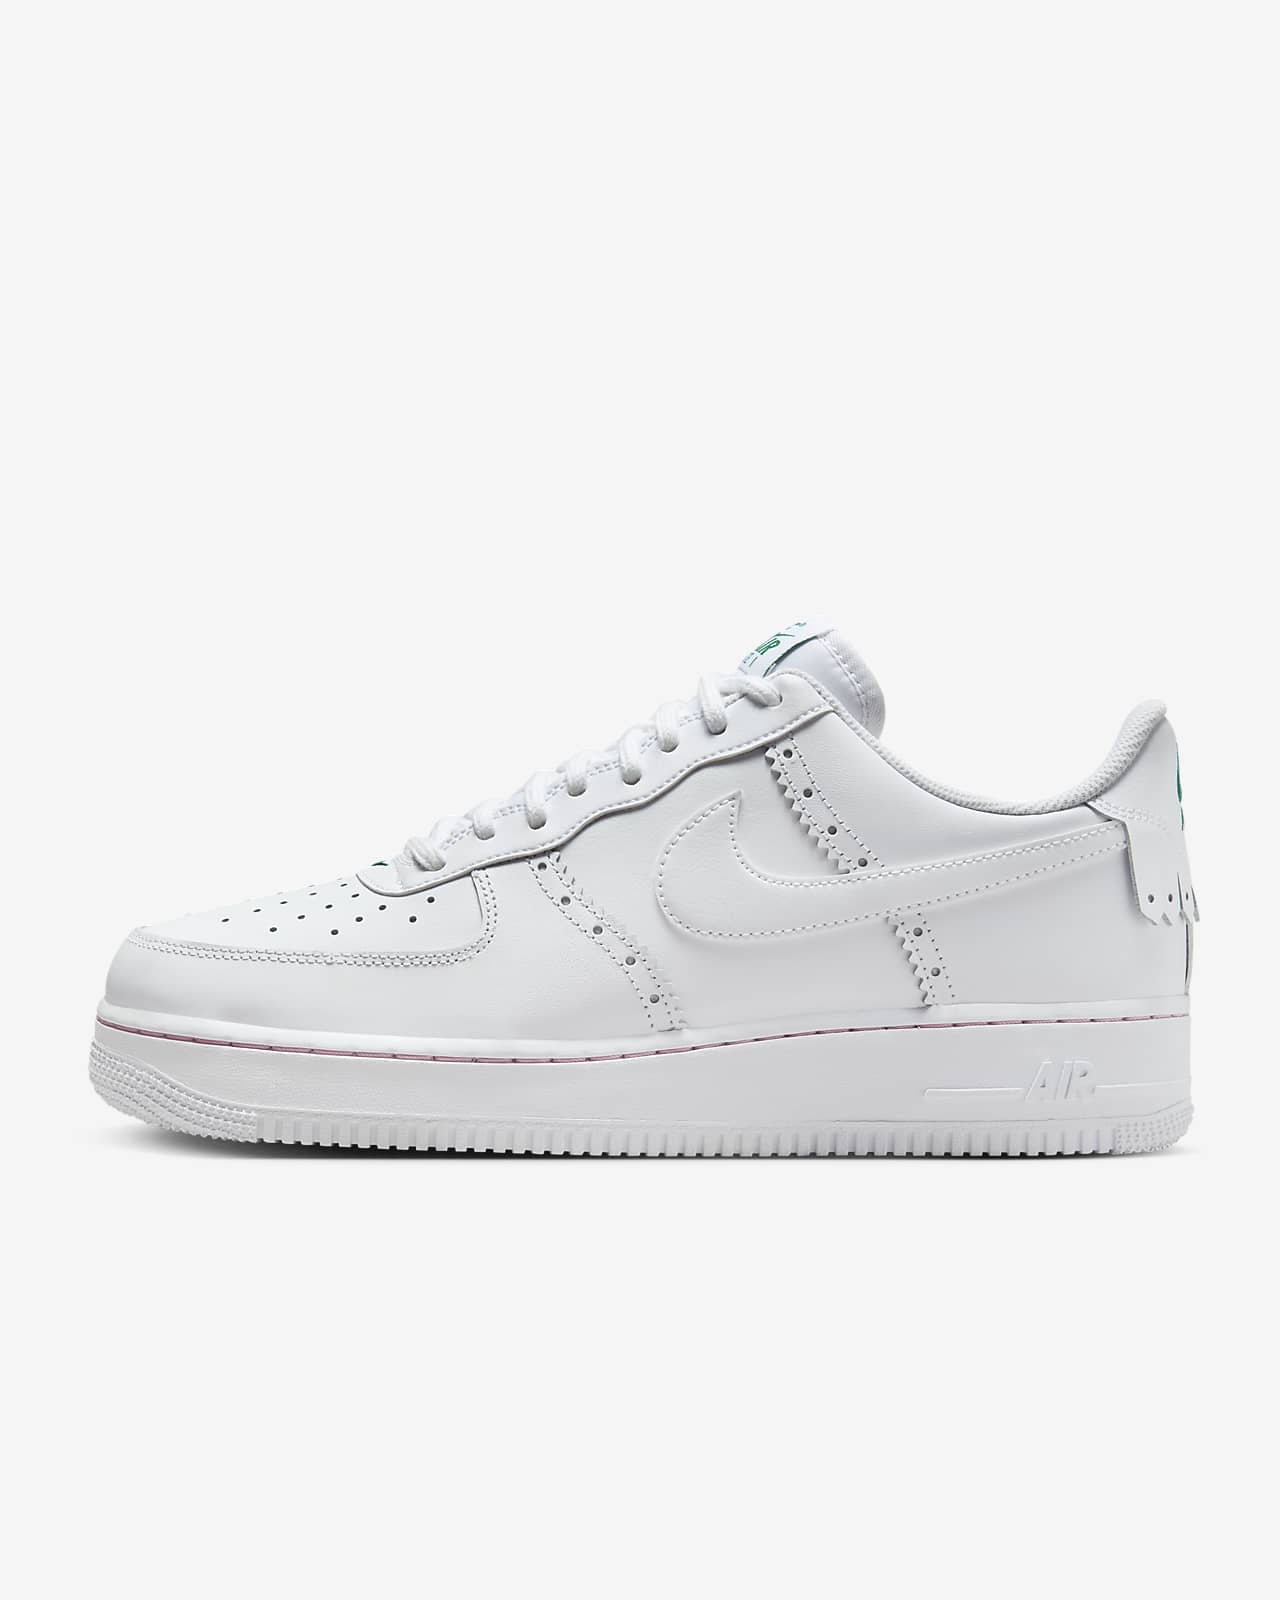 Chaussure Nike Air Force 1 '07 LV8 pour homme